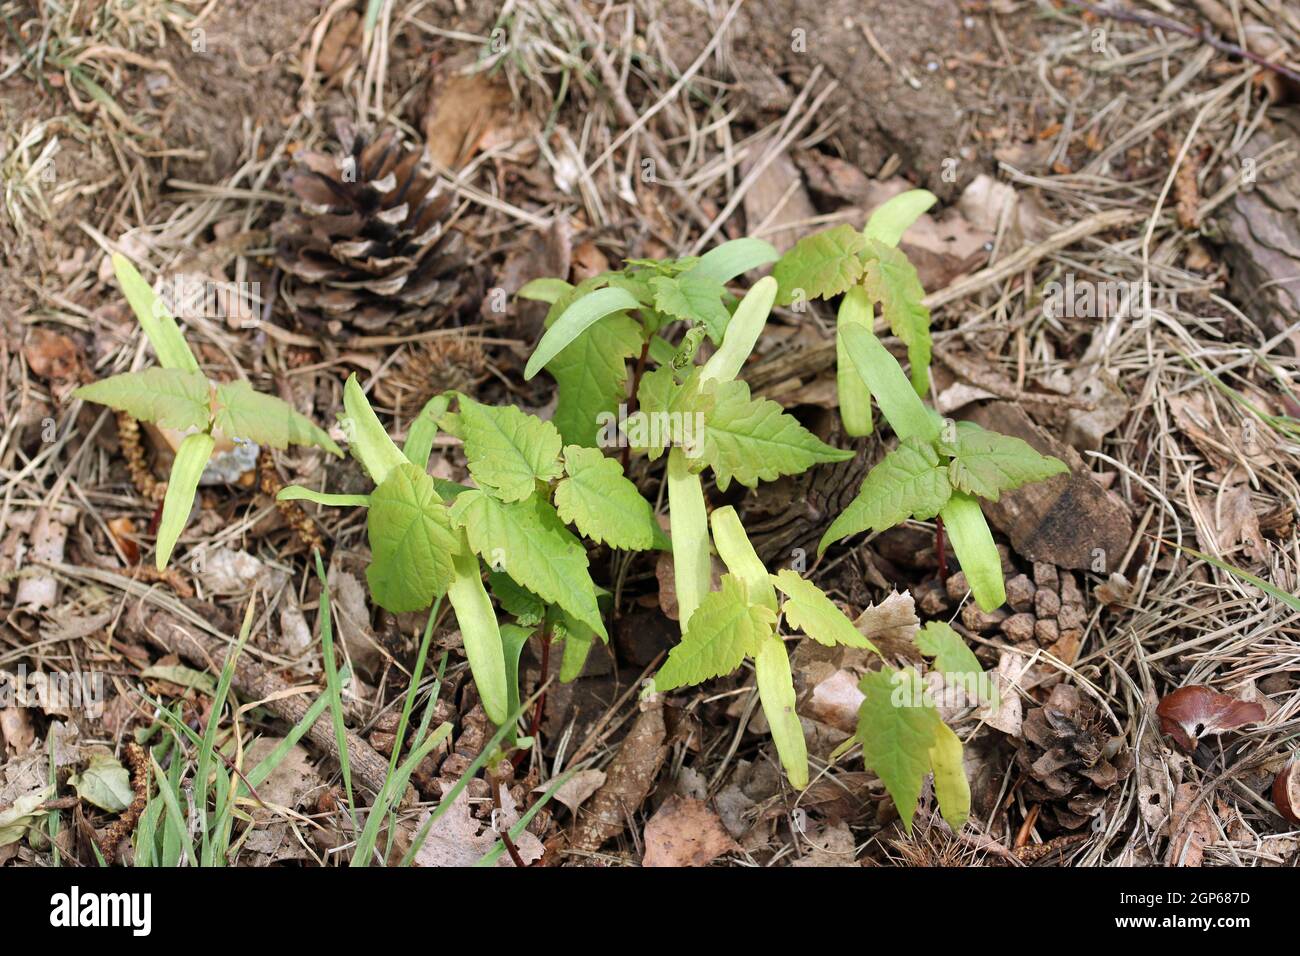 Sycamore, Acer pseudoplatanus, tree seedlings newly emerged in a conifer woodland in spring with a background of conifer leaves, cones and soil. Stock Photo